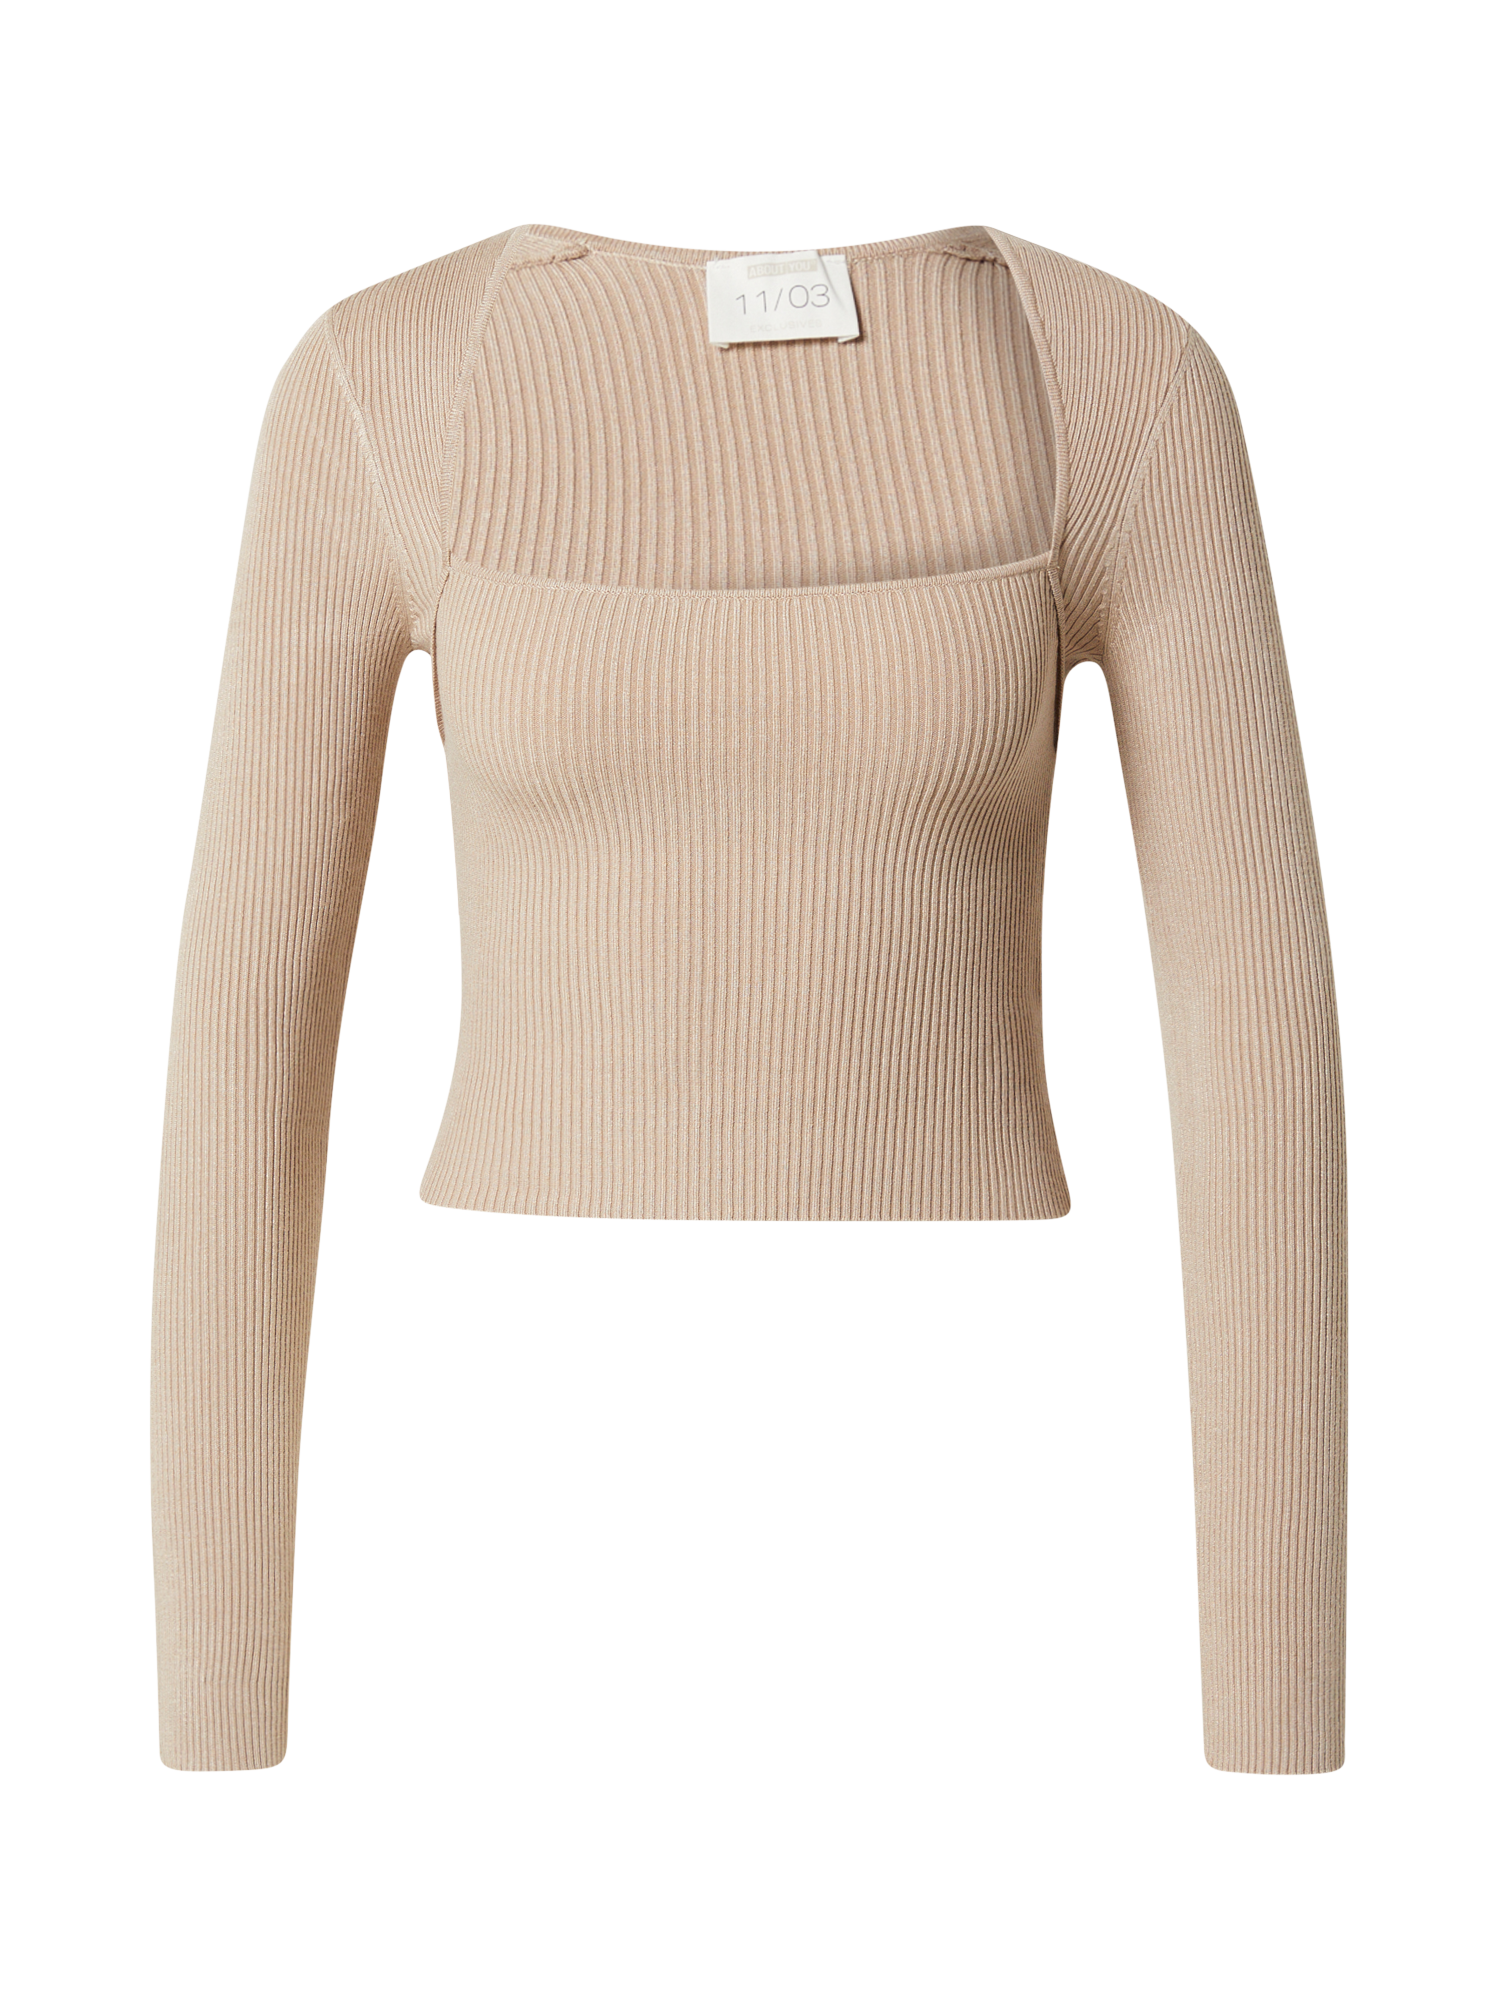 Kendall for Pullover Jale in Champagne 